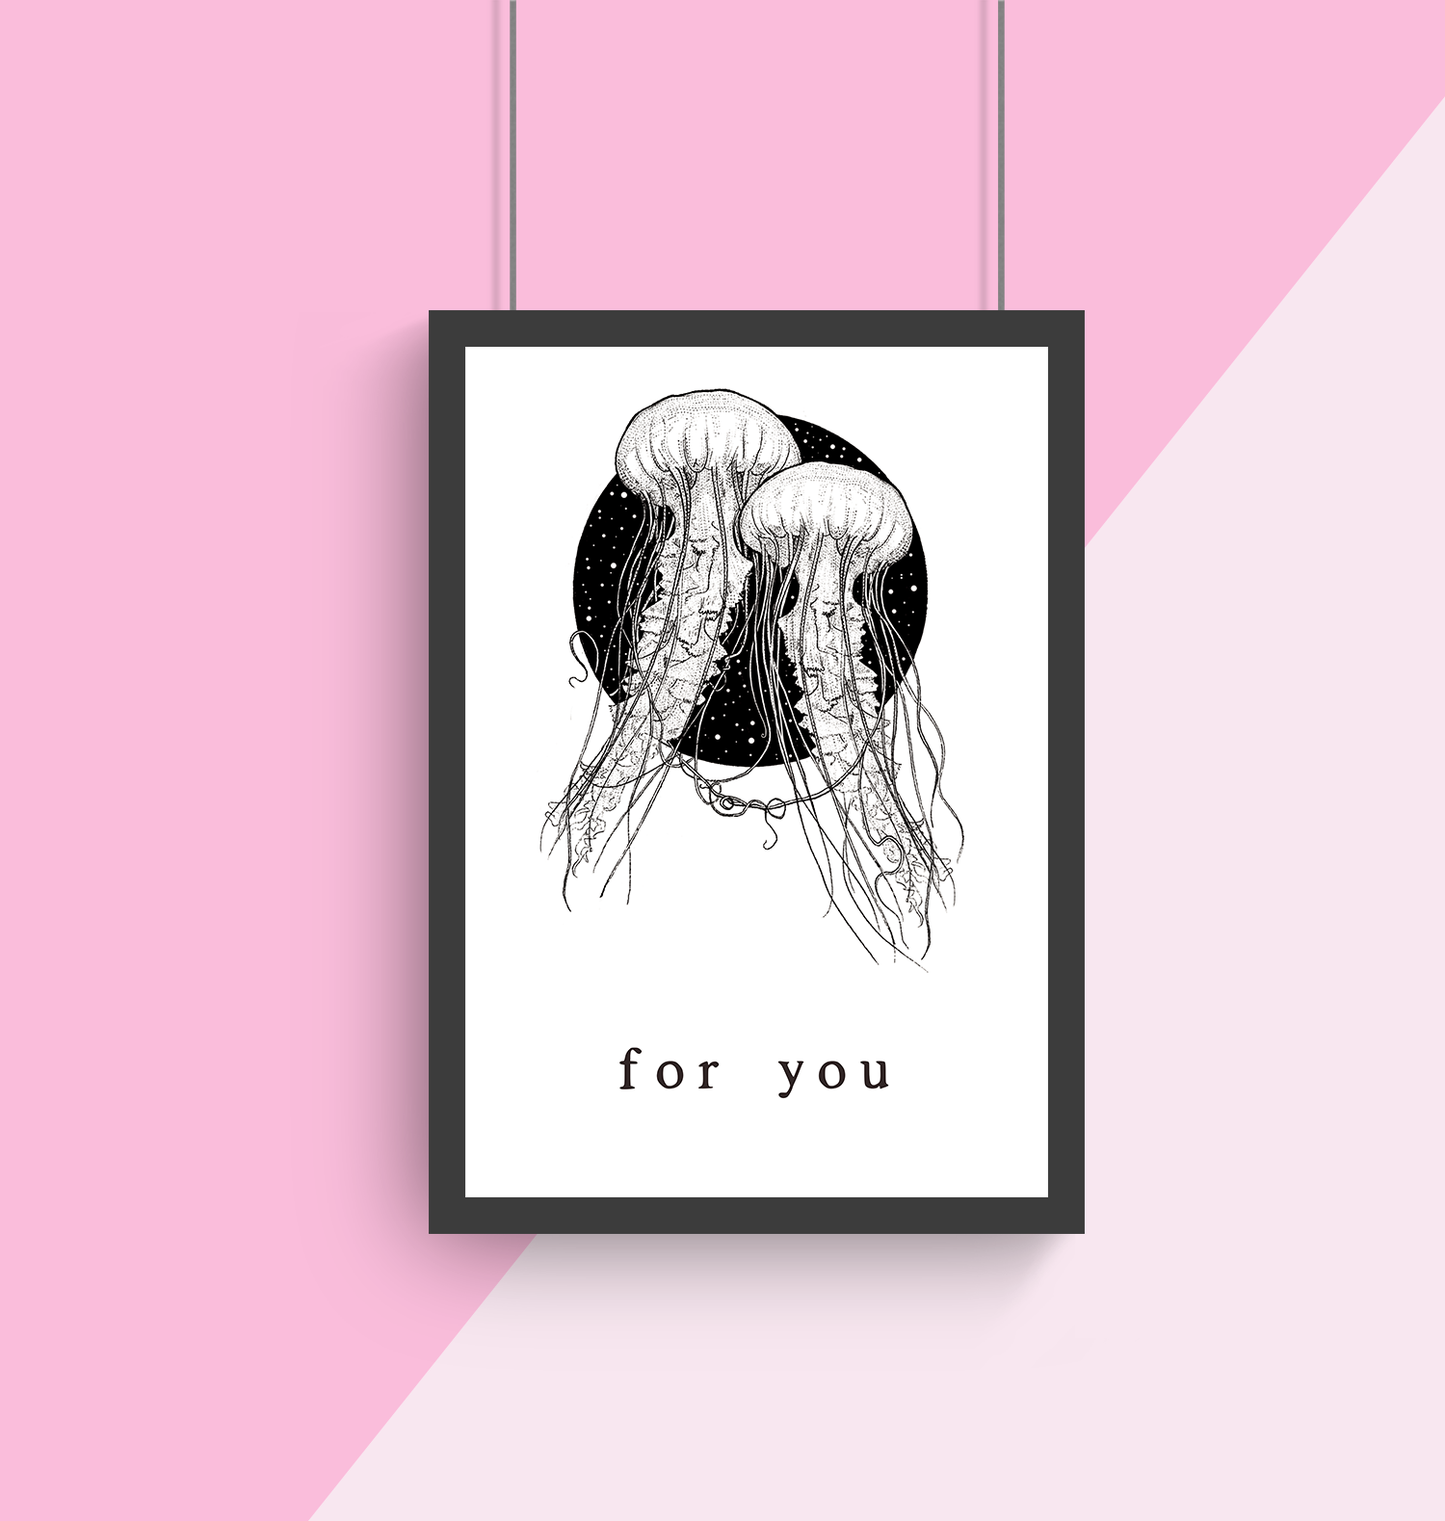 For You A4 Print Collaboration by Two Brides Presents and Courtney Peppernell